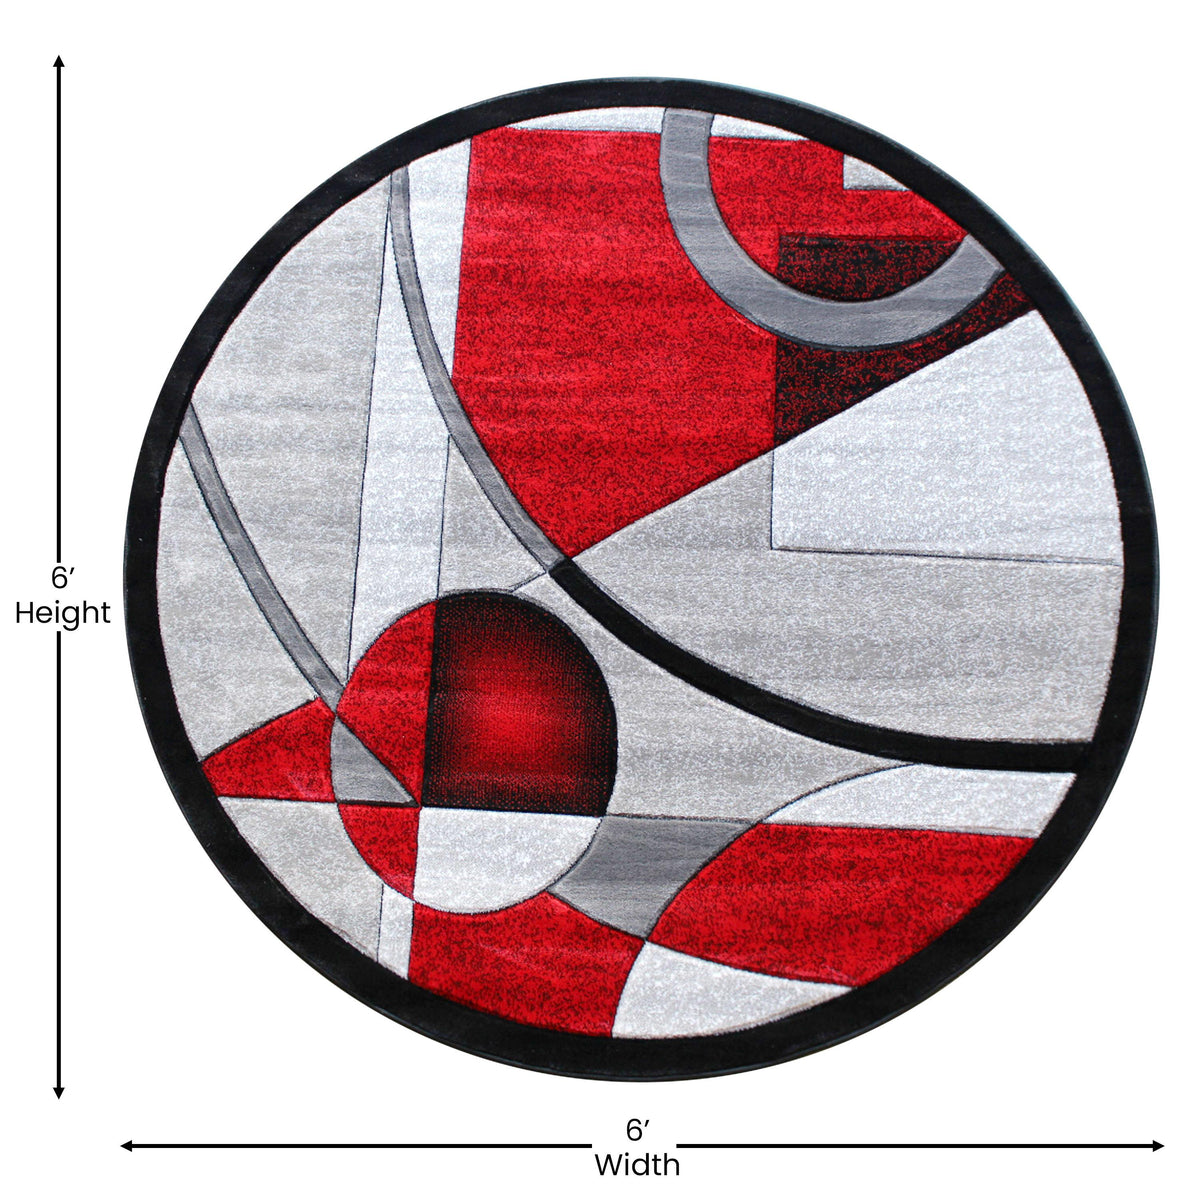 Red,5' Round |#| Modern Geometric Abstract Area Rug - Turquoise, Black, & Gray - 5' x 5' Round